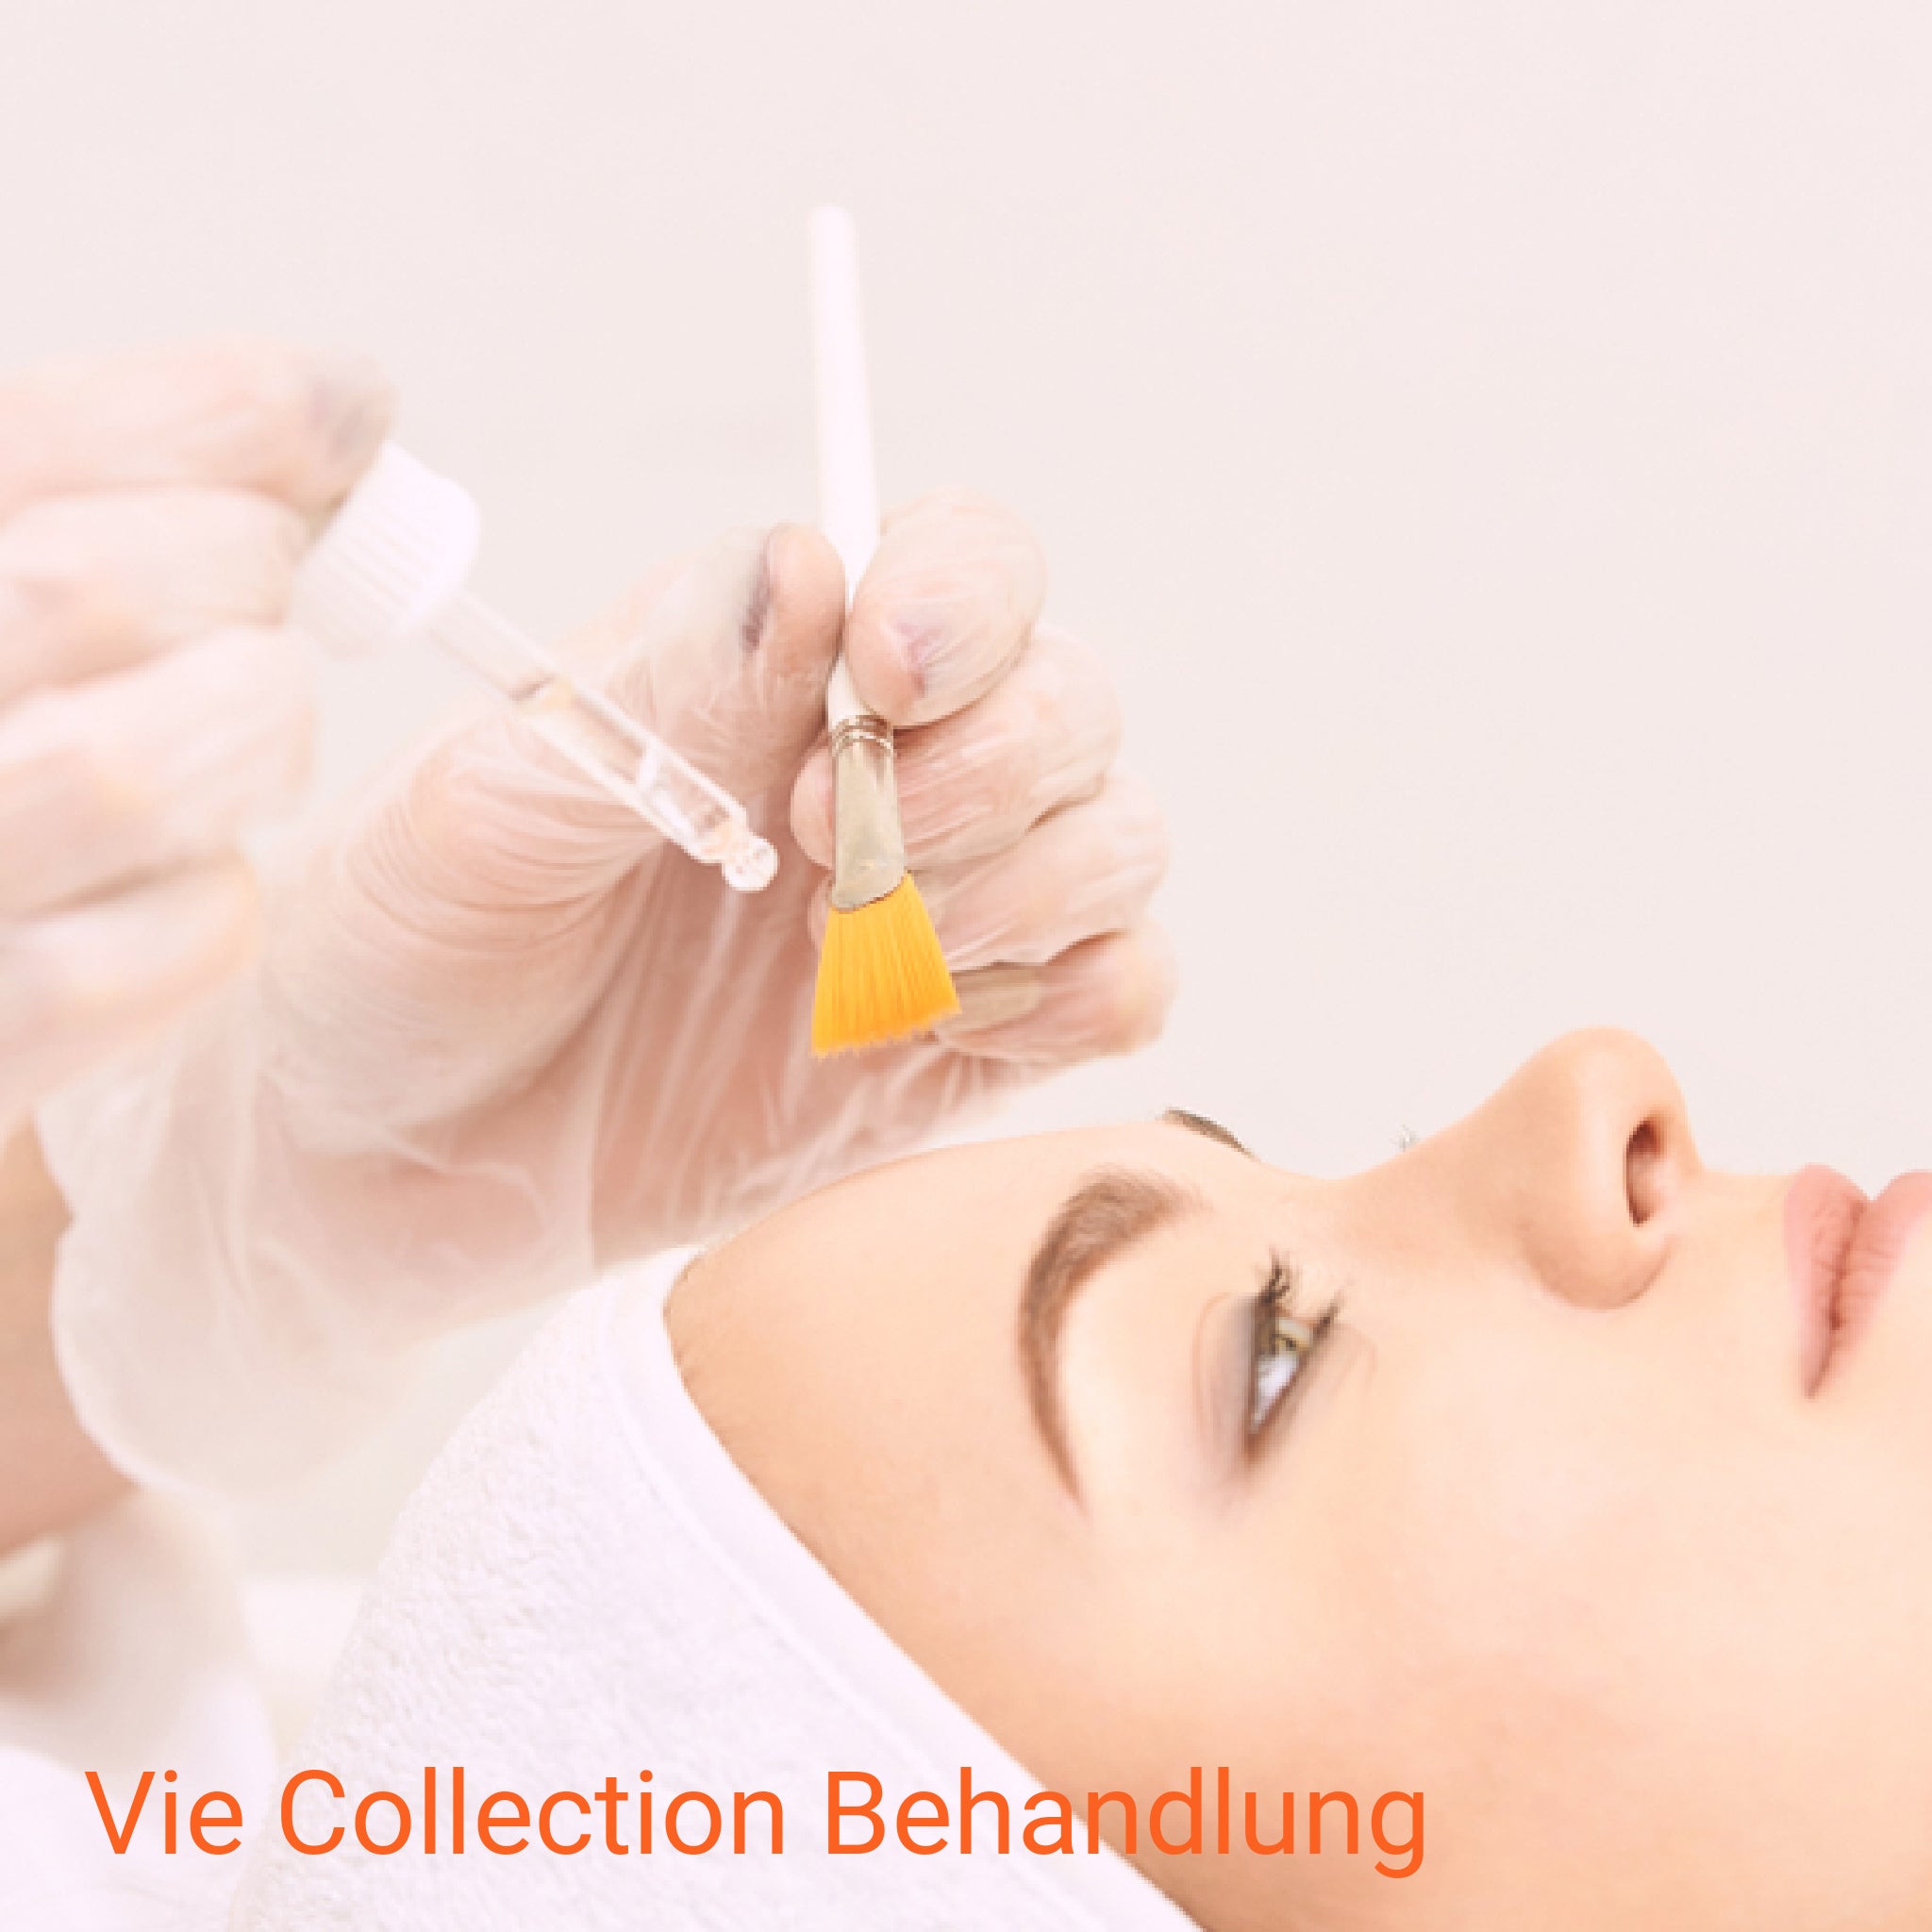 BEHANDLUNG L-THERAPY